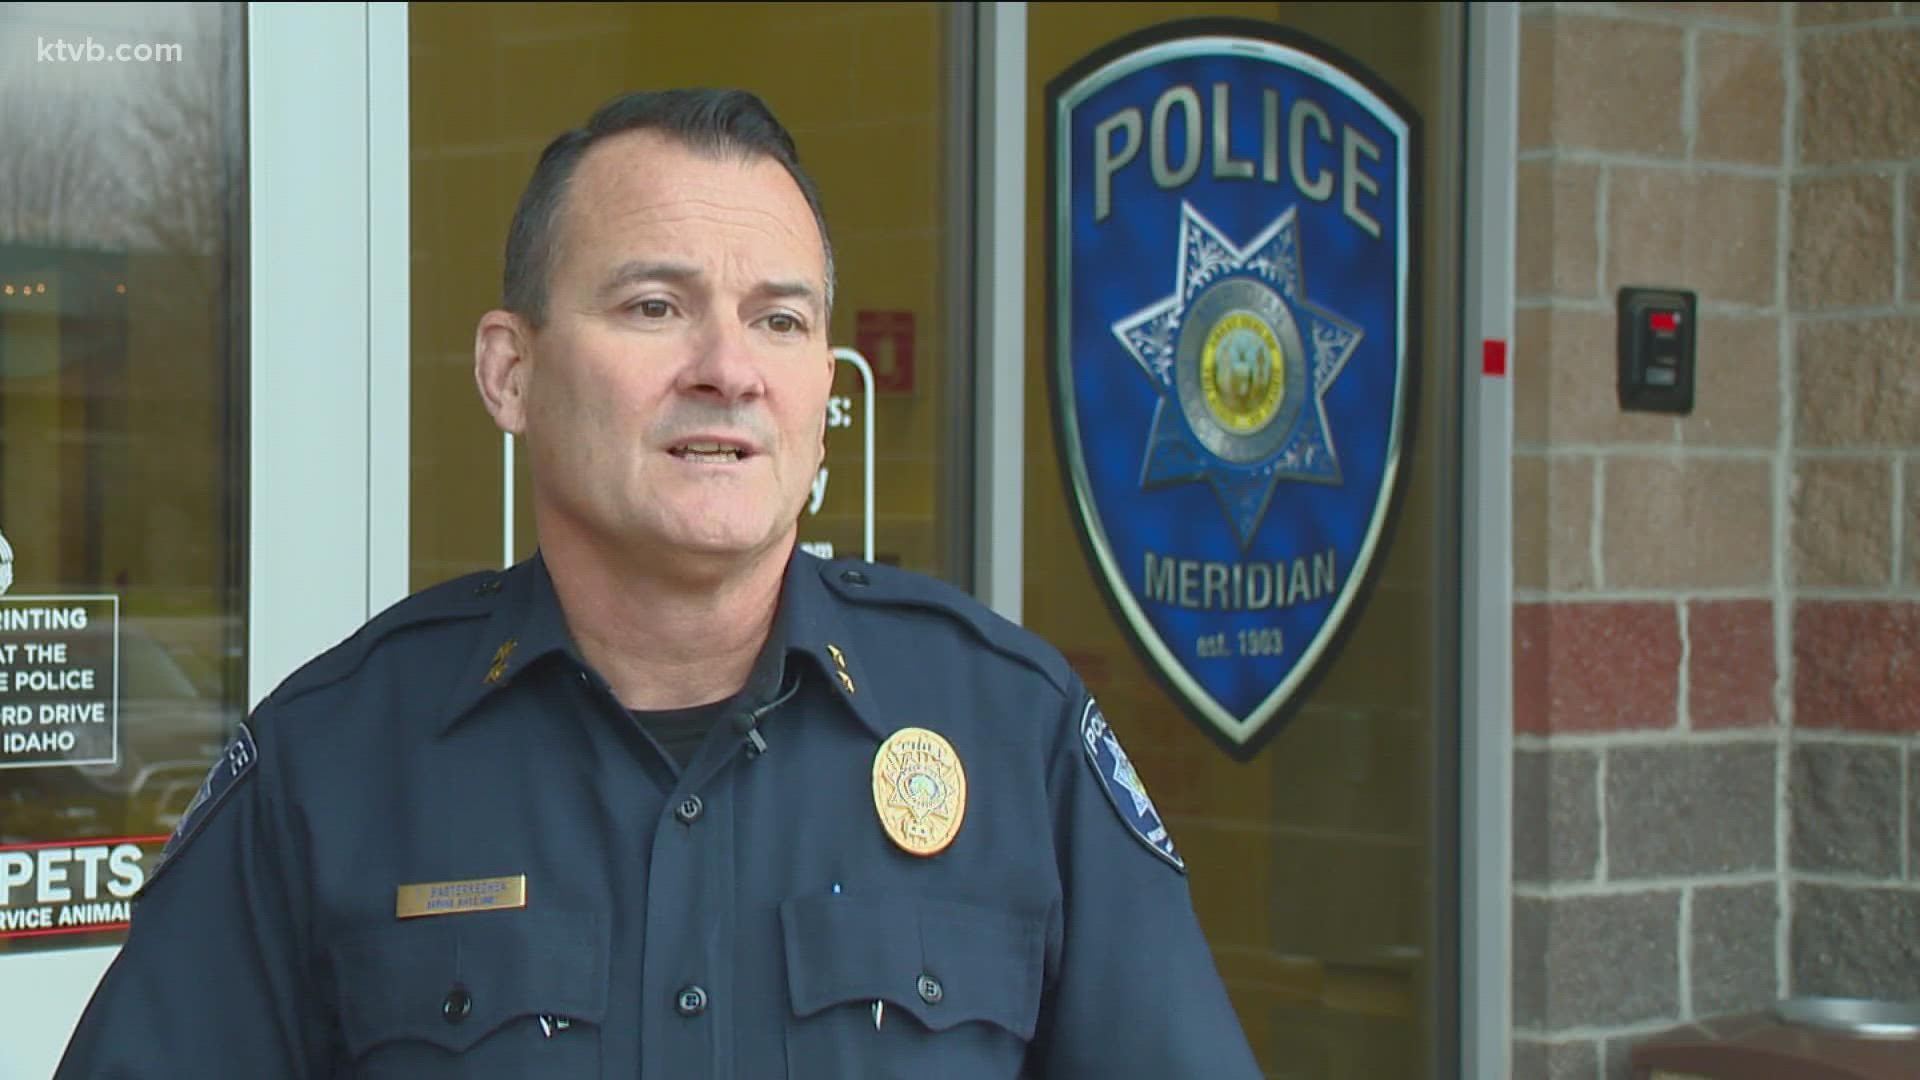 Several law enforcement agencies in the Treasure Valley told KTVB Thursday, "they are unaware of any credible threats affecting local schools."